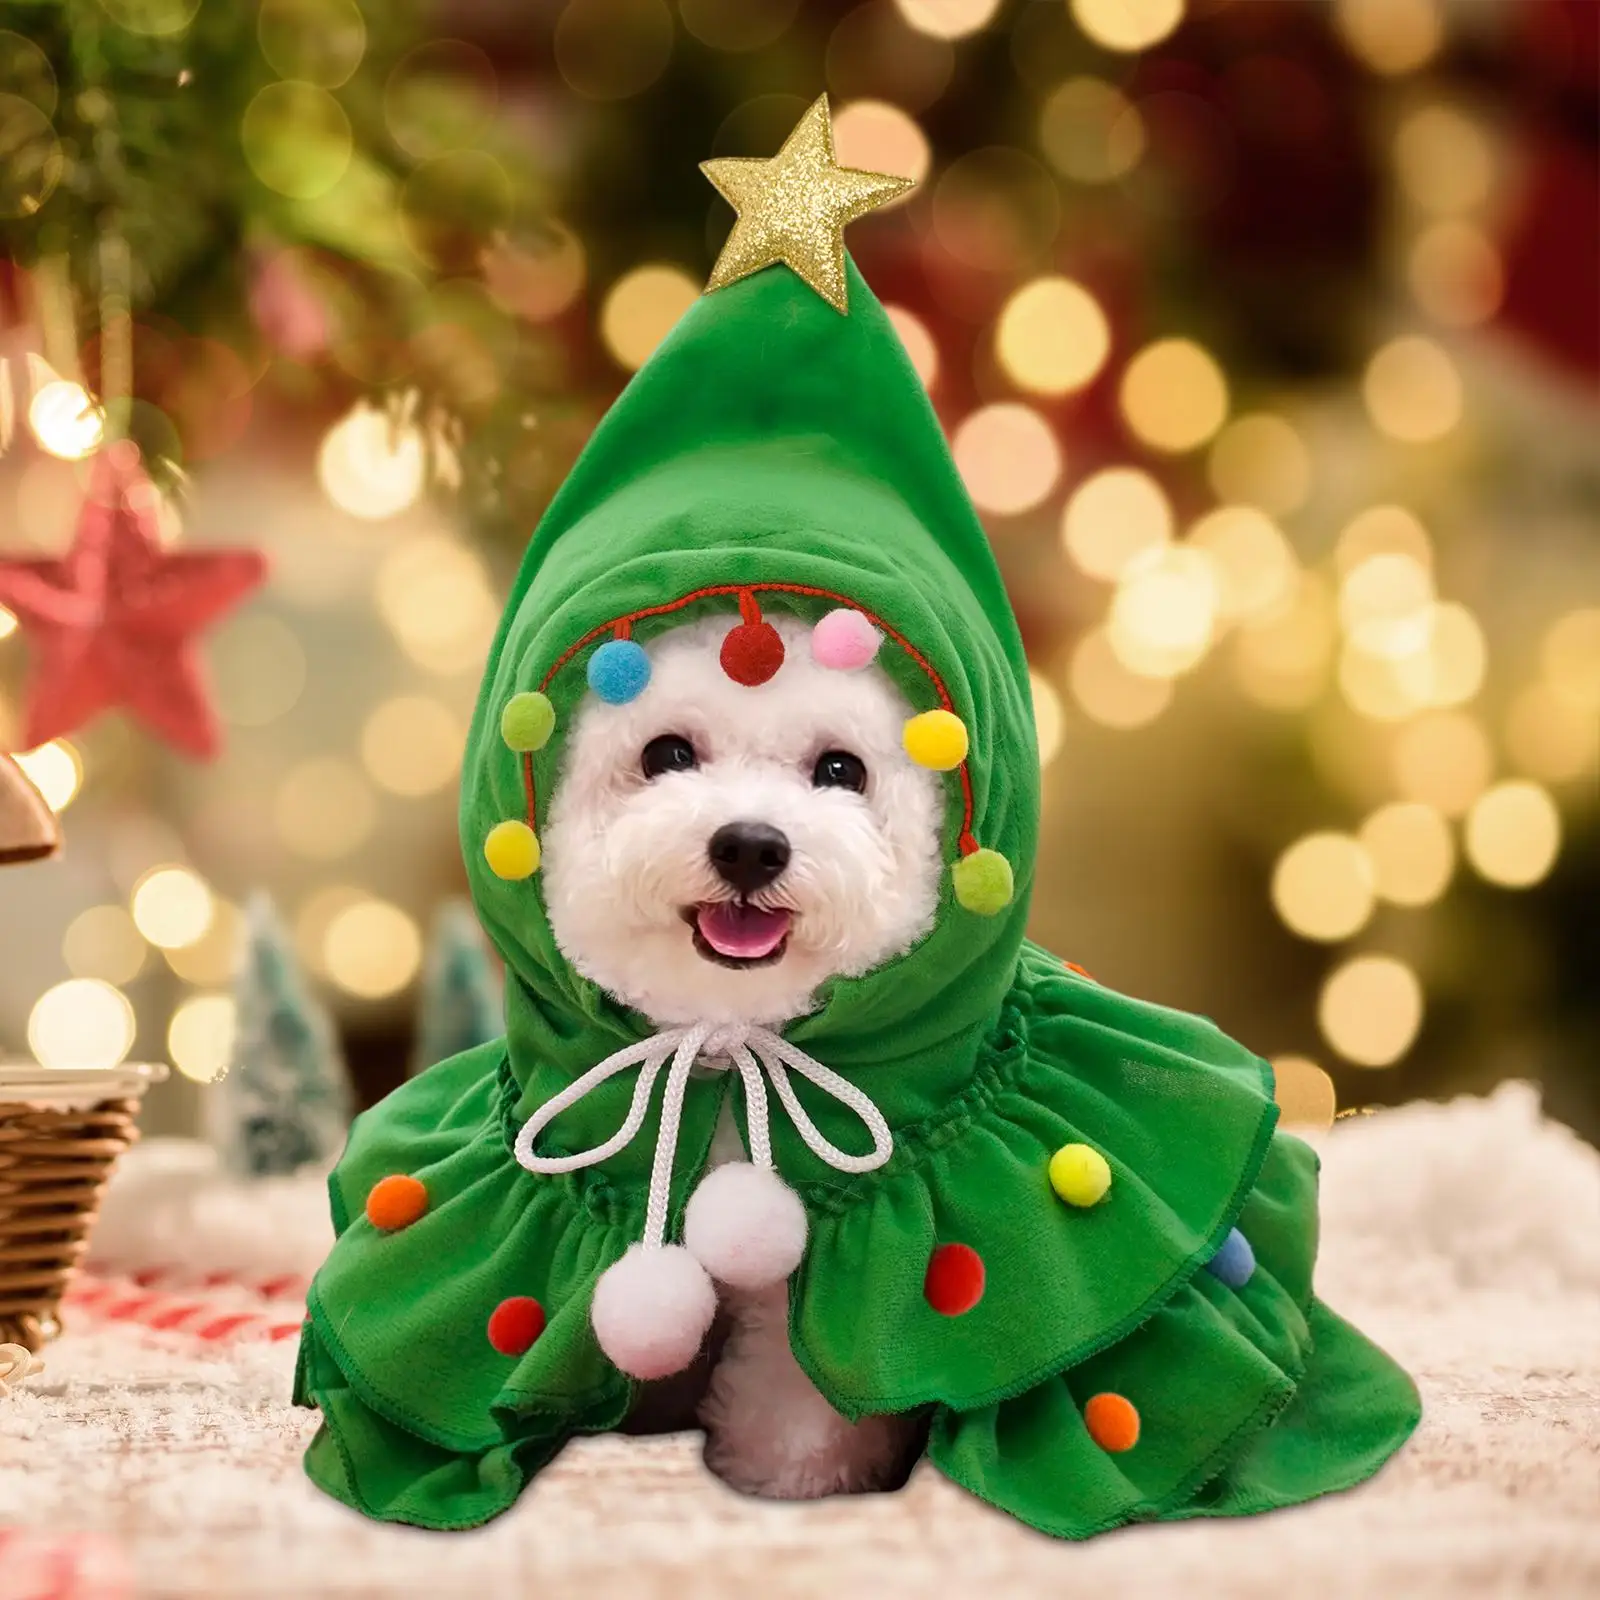 Pet Christmas Costume Cosplay Dress Pet Hoodie Cat Santa Outfit Xmas Cloak with Star and pompoms for Small Medium Dog Cat 